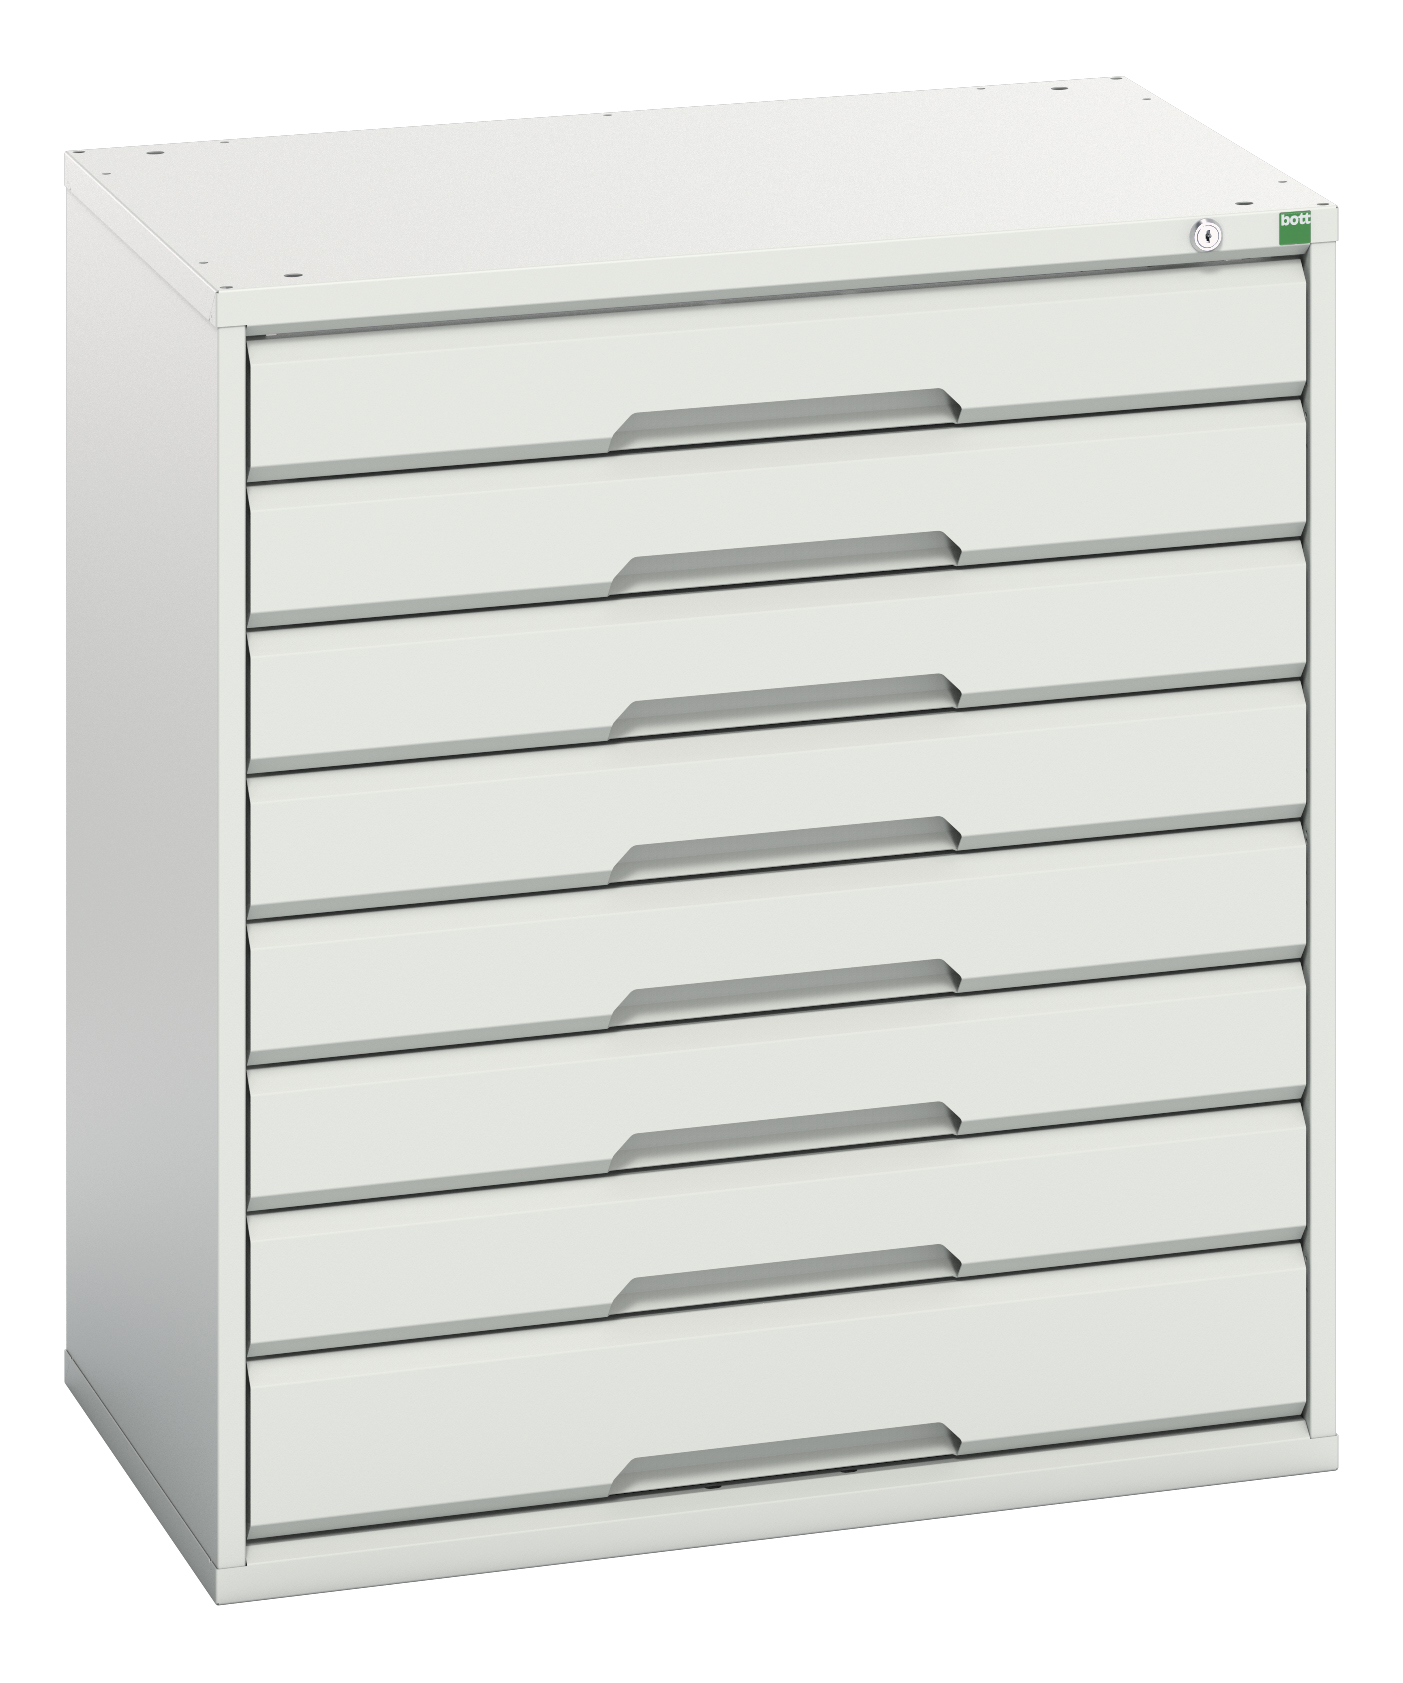 Bott Verso Drawer Cabinet With 8 Drawers - 16925133.16